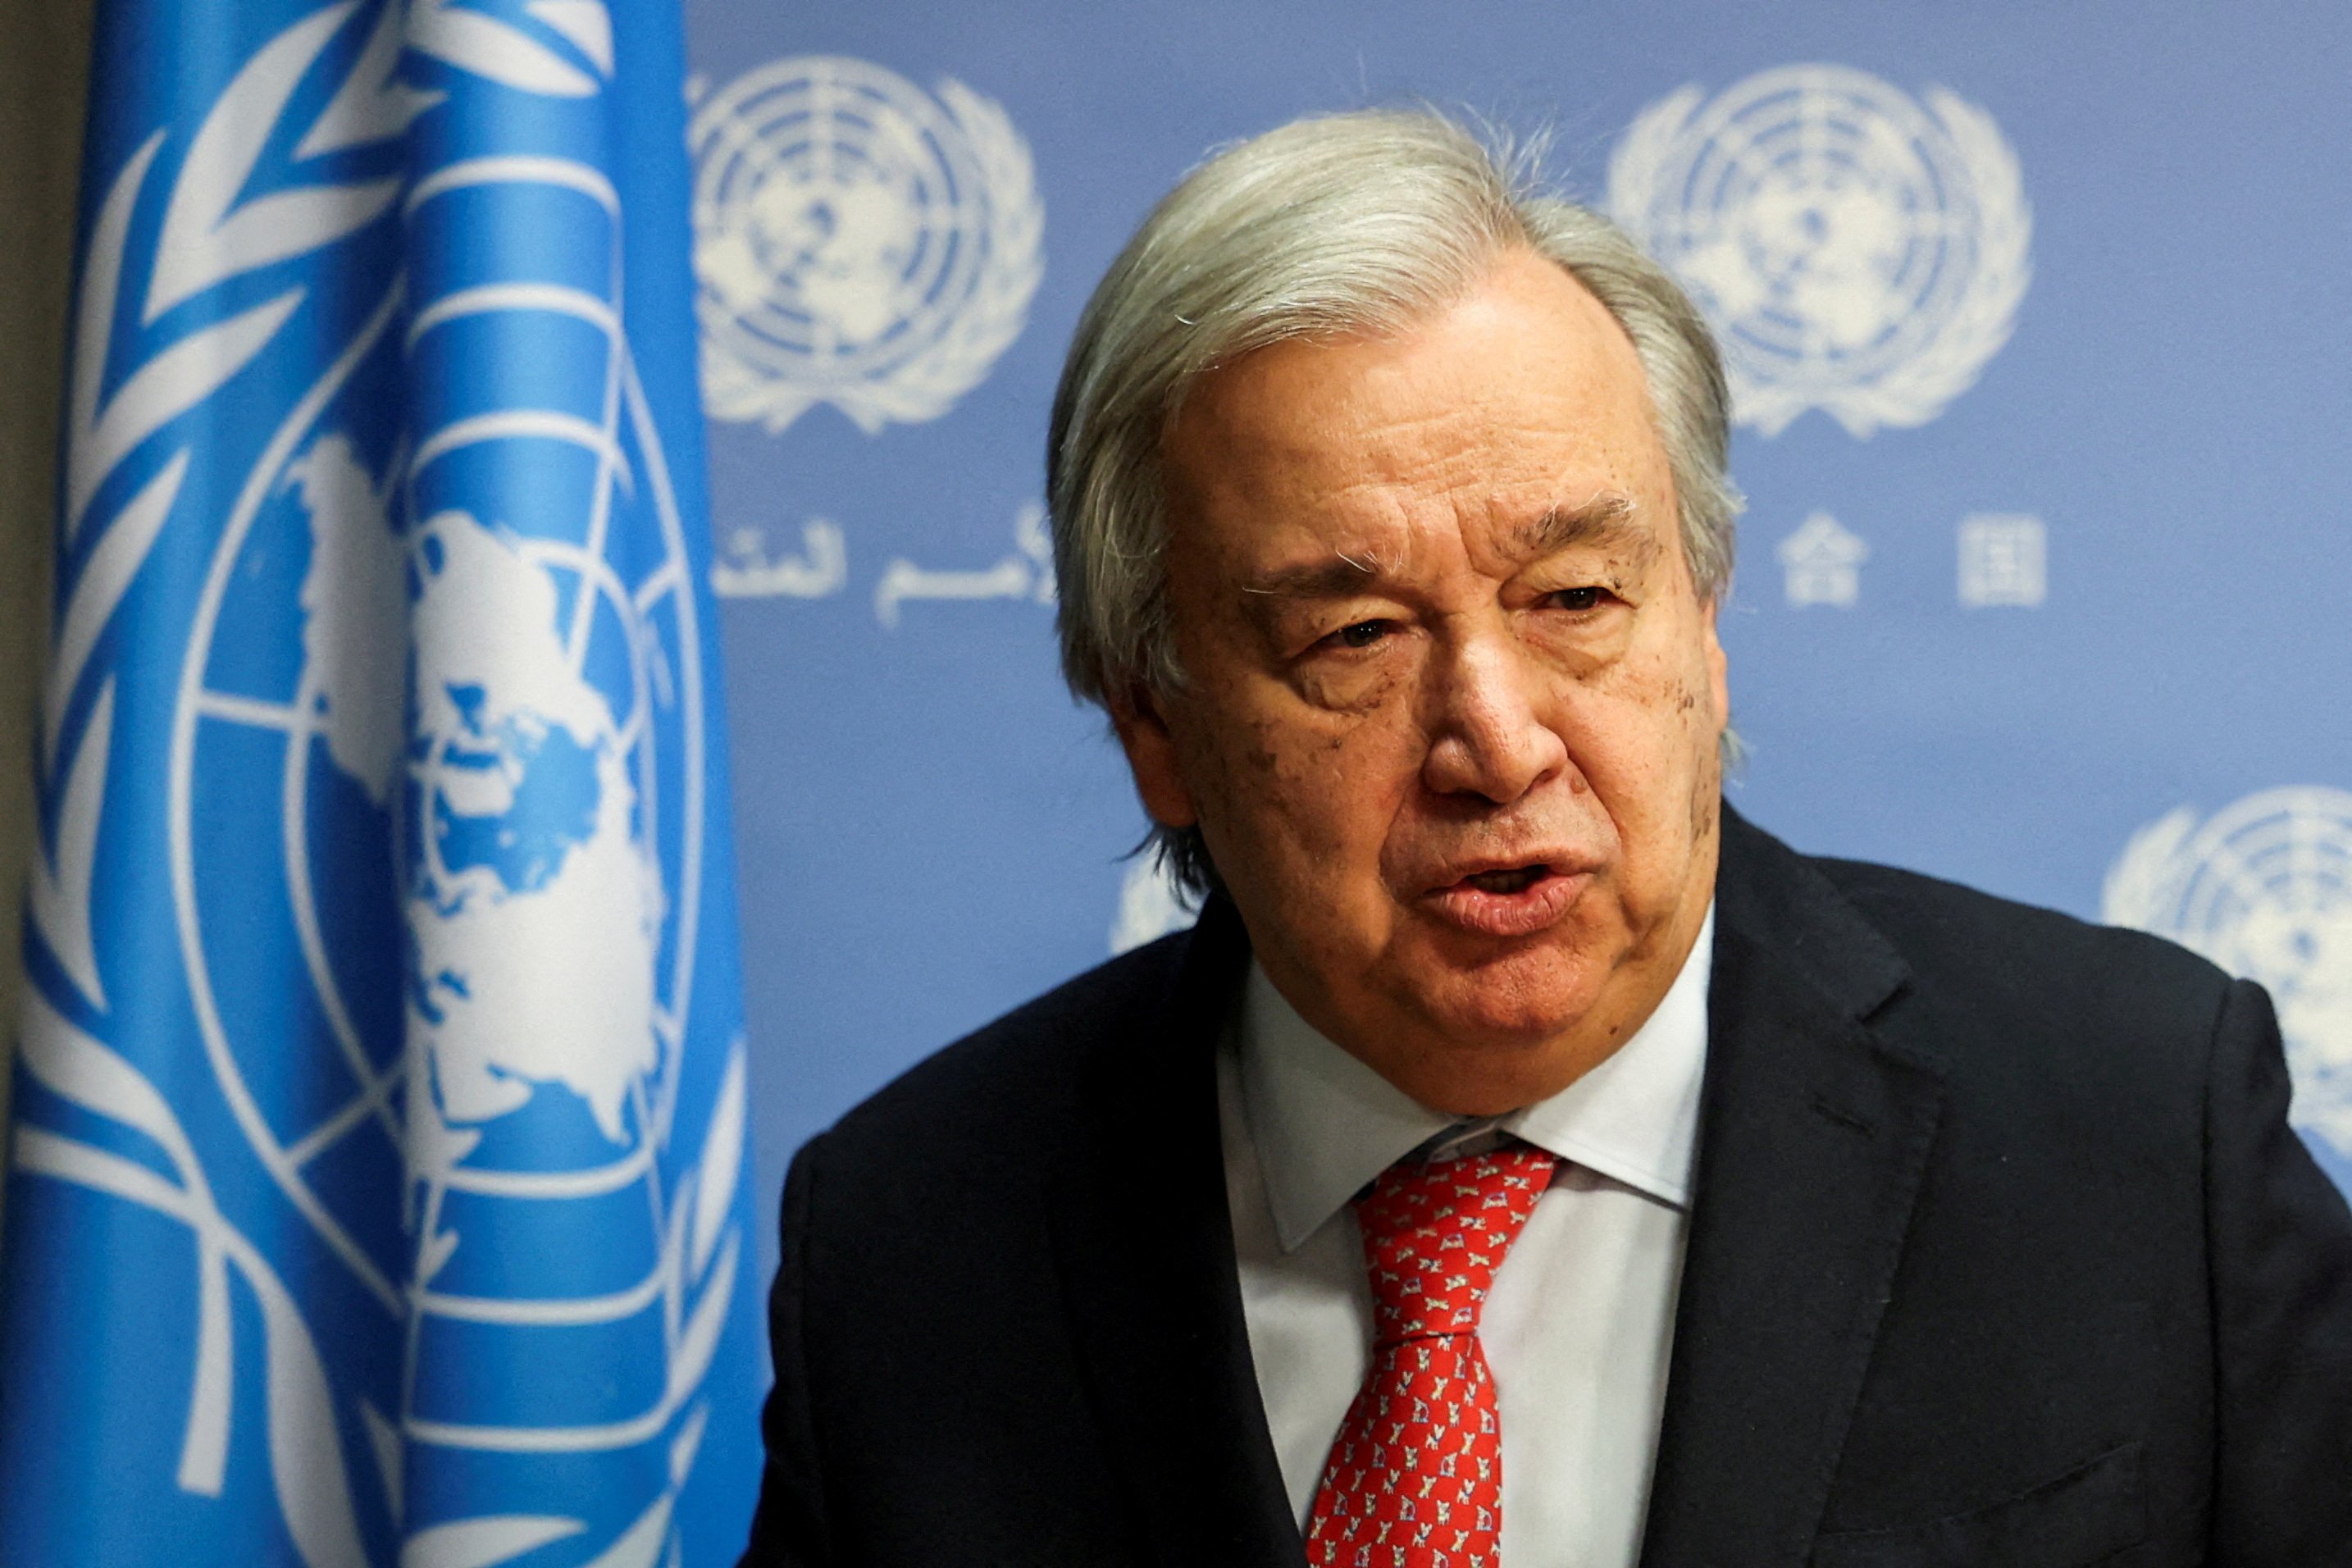 Growing frustration in Cyprus says Guterres